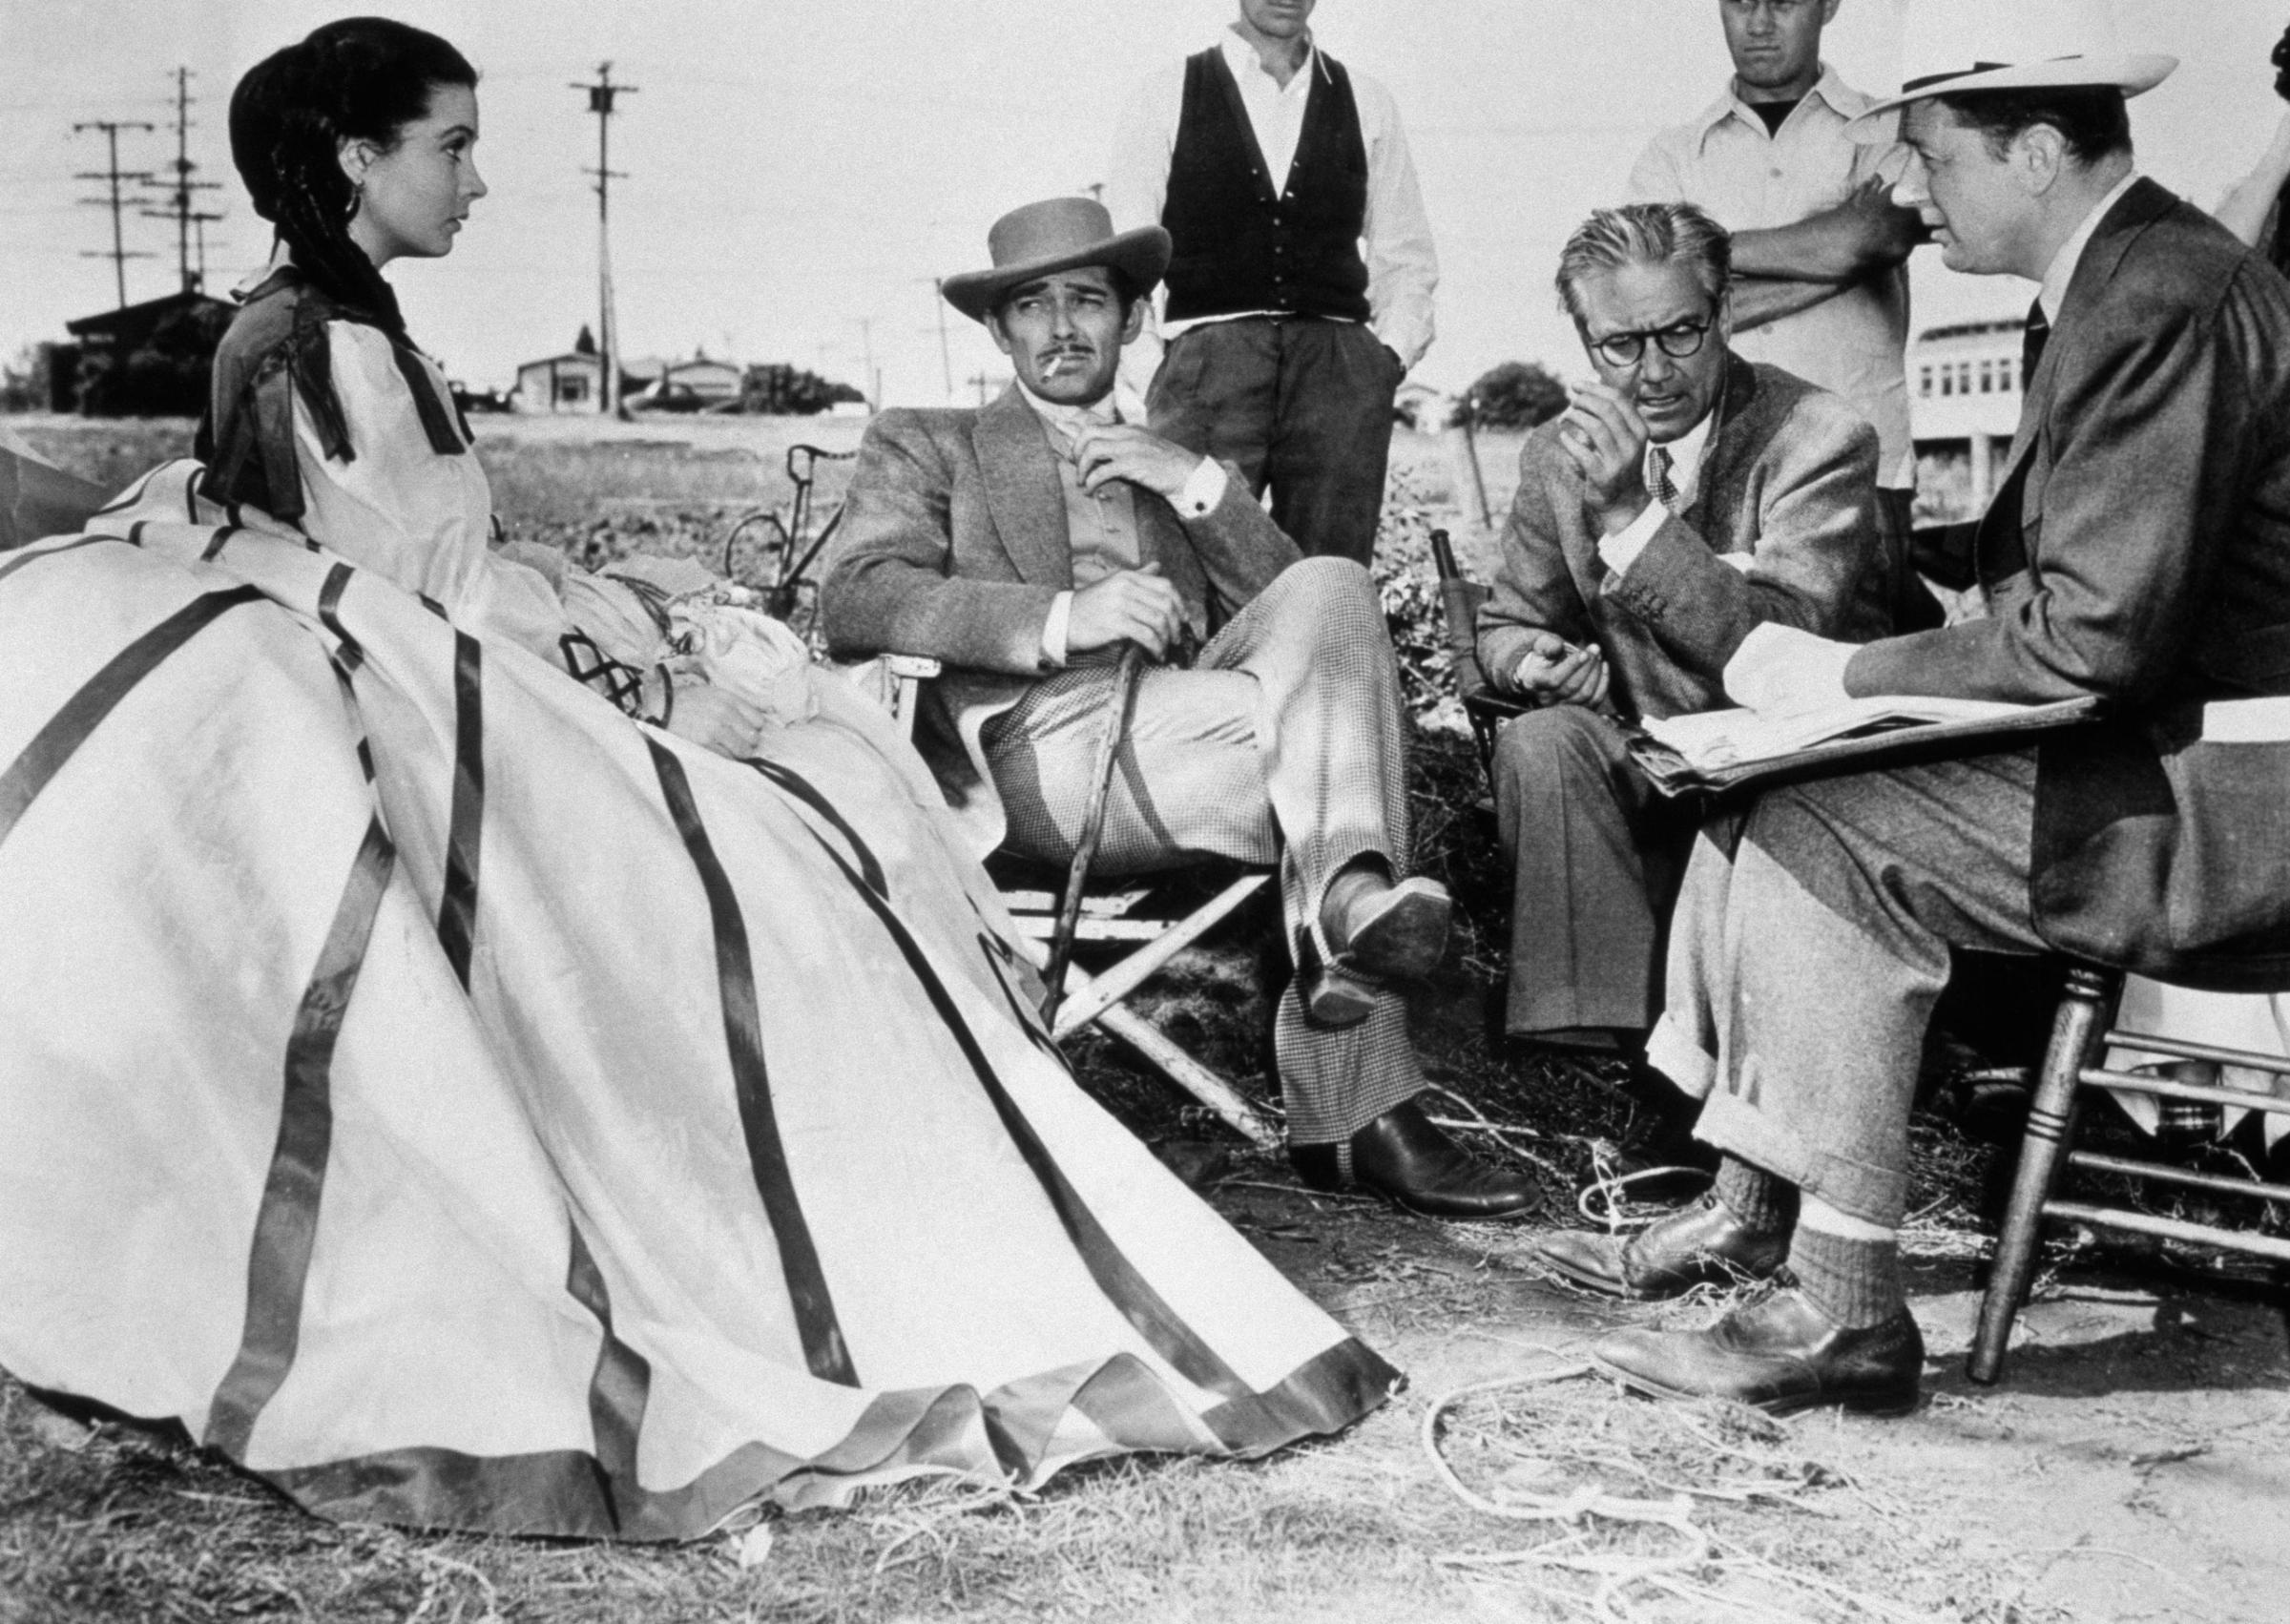 Leigh, Gable and Fleming take a breather on set